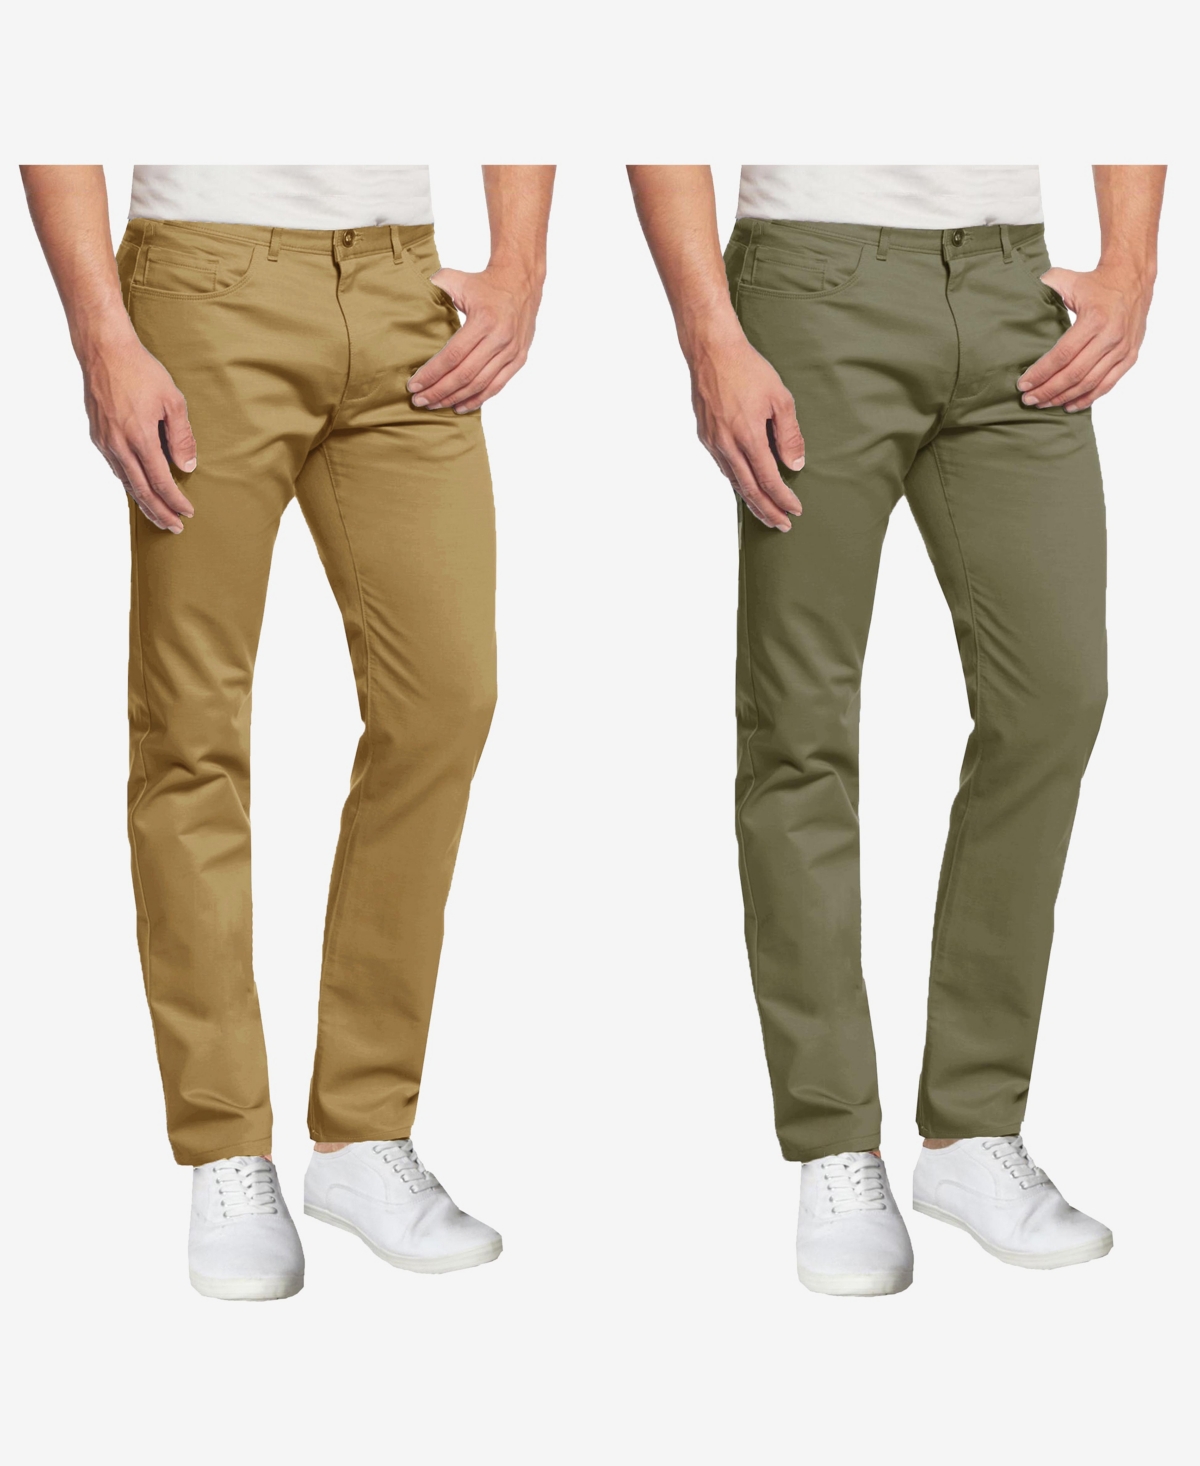 Galaxy By Harvic Men's 5-pocket Ultra-stretch Skinny Fit Chino Pants, Pack Of 2 In Olive,timber